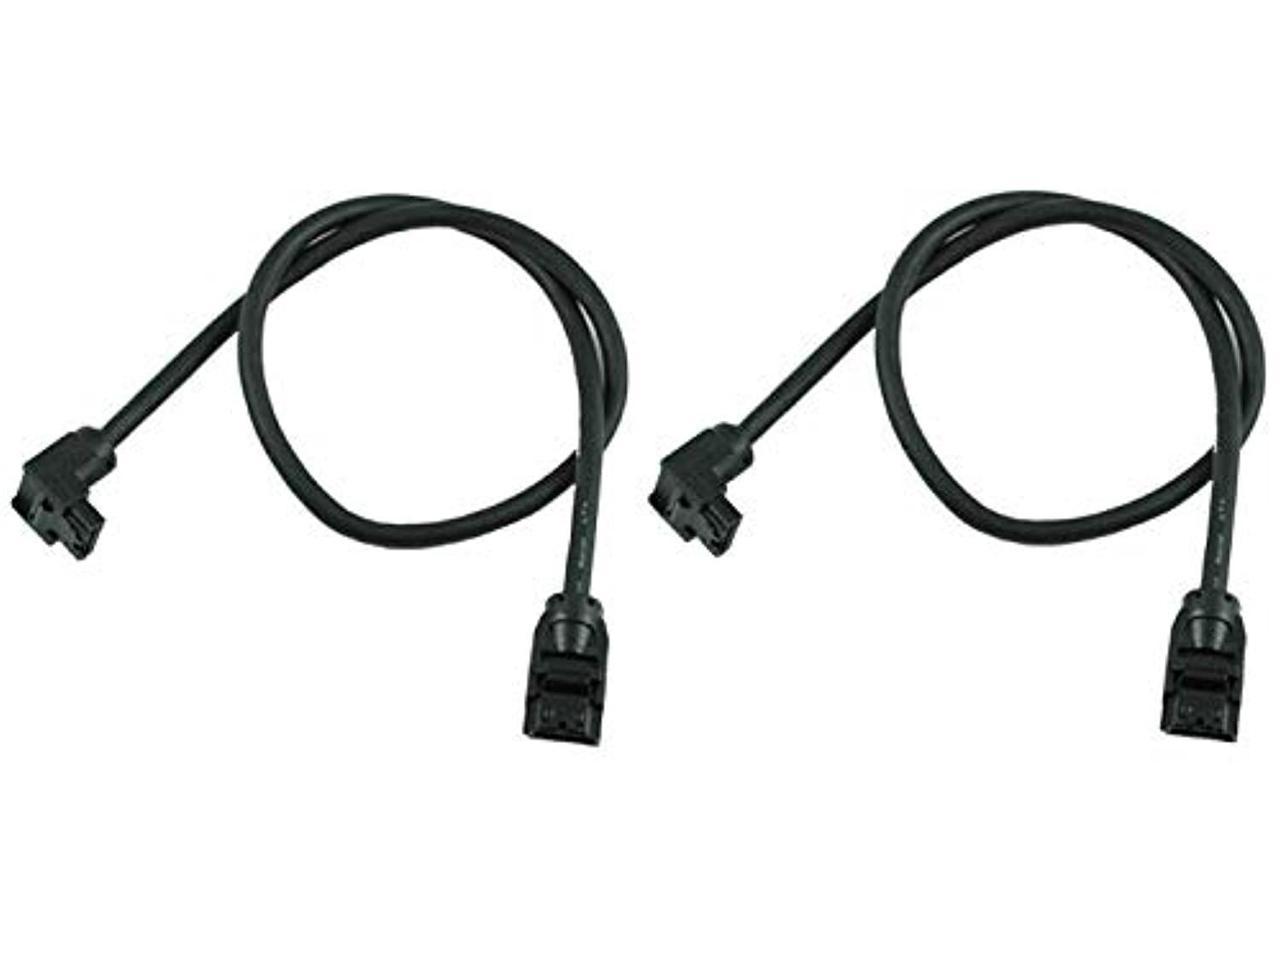 OKGEAR 36" SATA 6Gbps Cable Straight to Right Angle W/Metal Latch Backw Black 